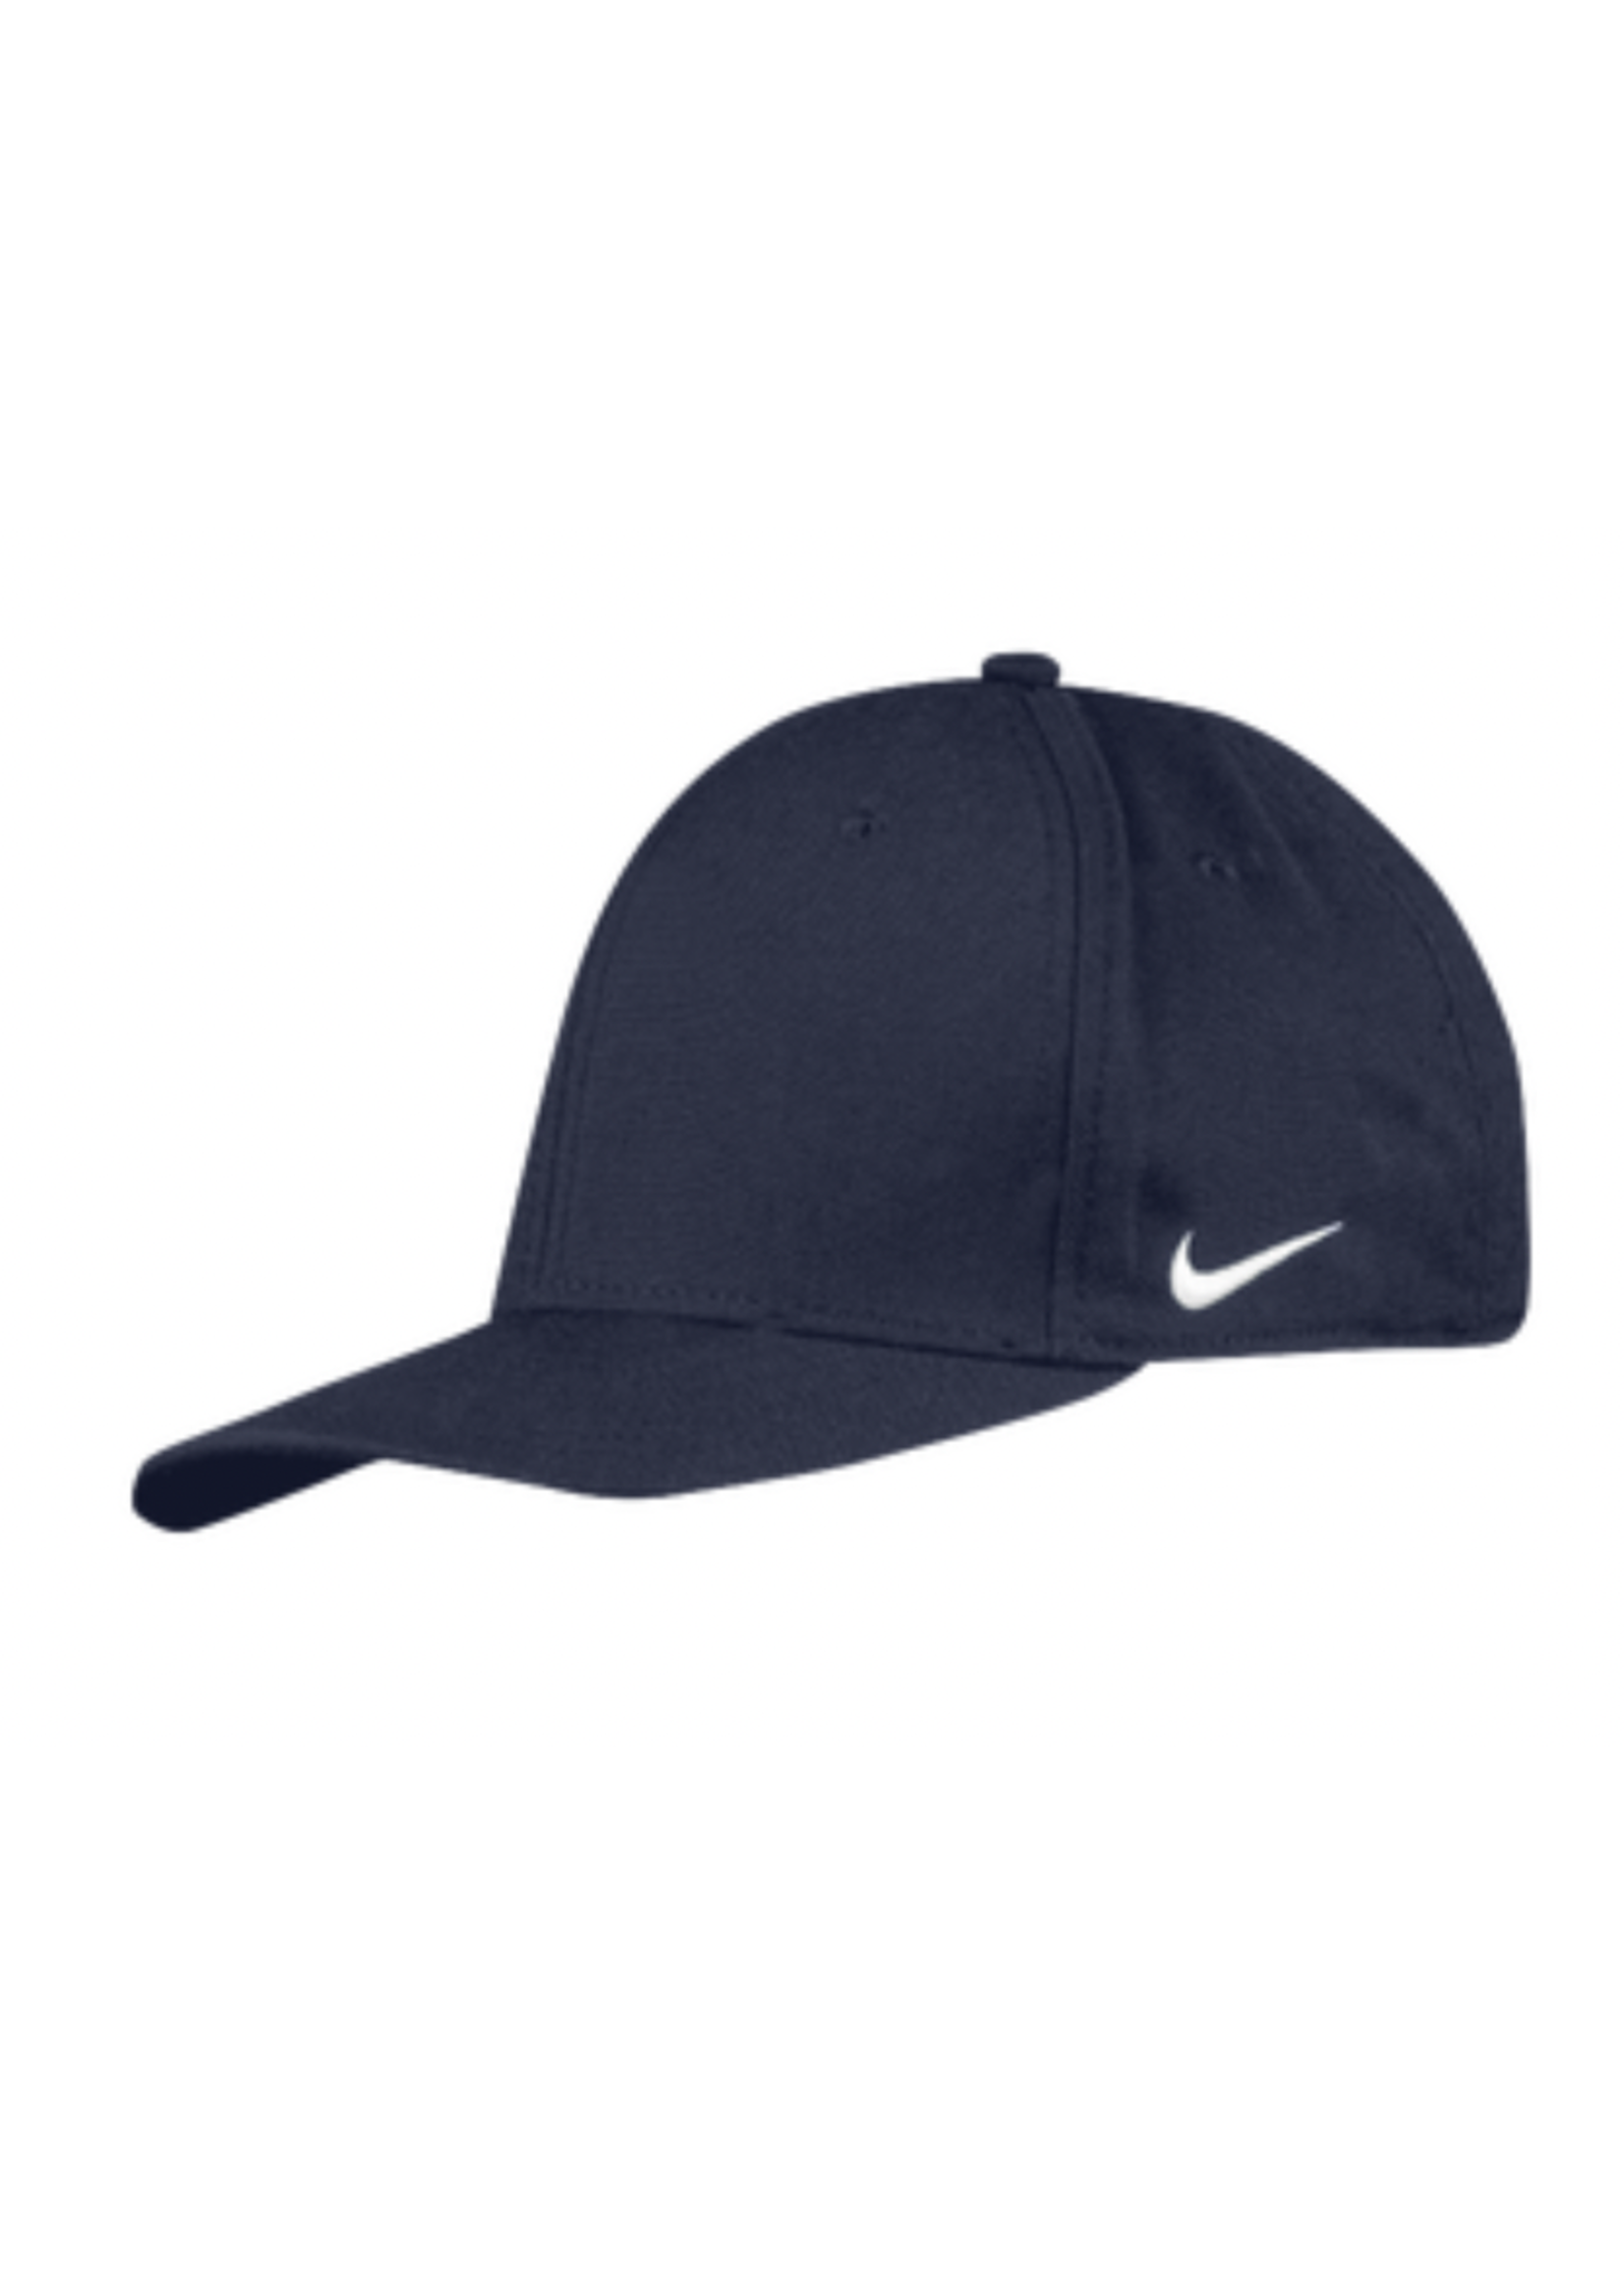 NON-UNIFORM Football - JD Nike Fitted Hat